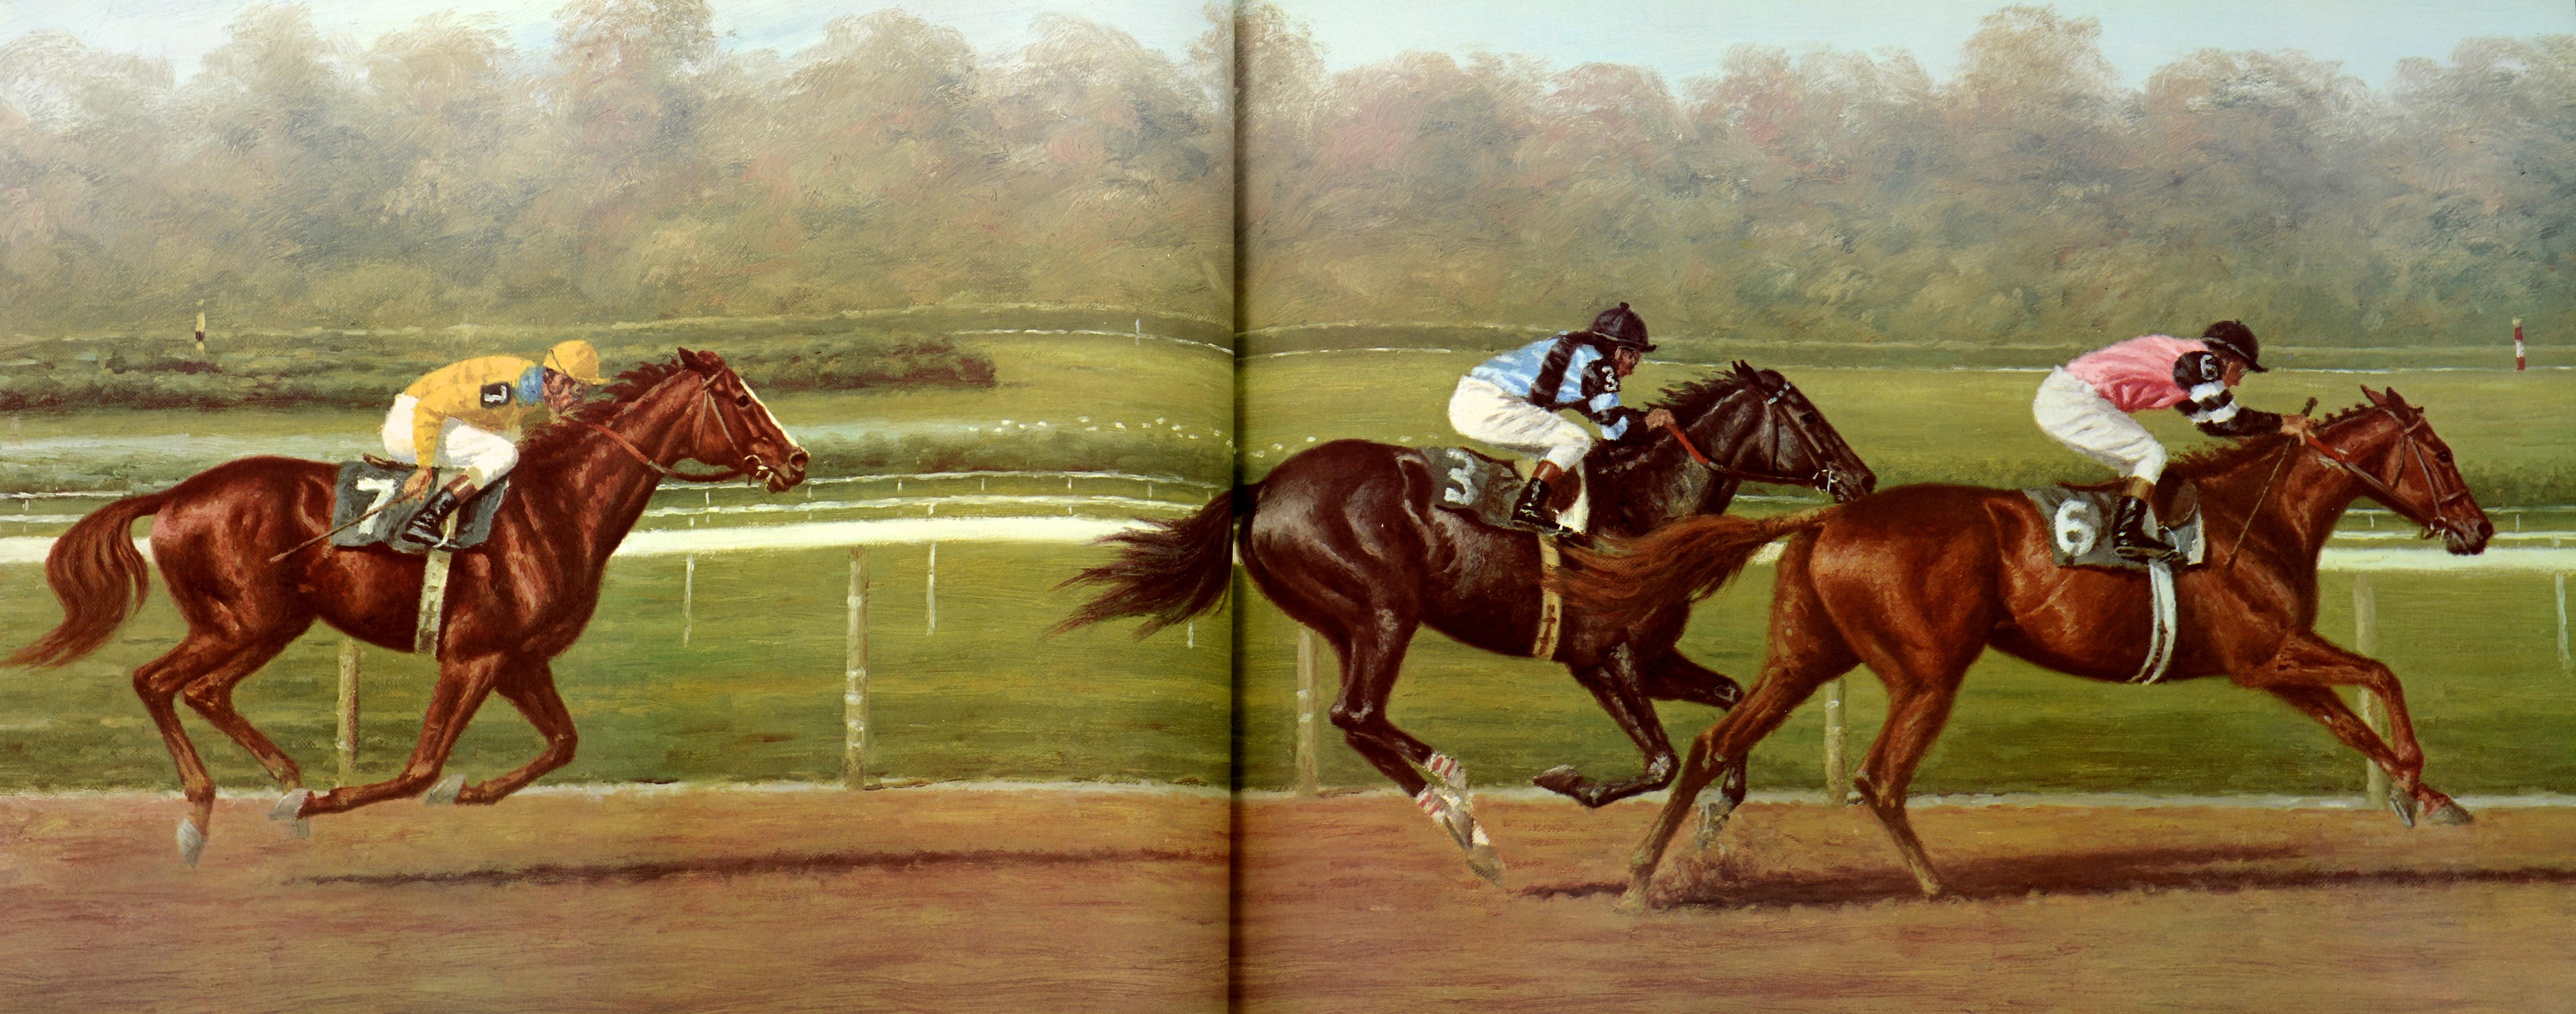 A Decade of Champions by Richard Stone Reeves and Patrick Robinson, 1st Ed  In Good Condition For Sale In valatie, NY